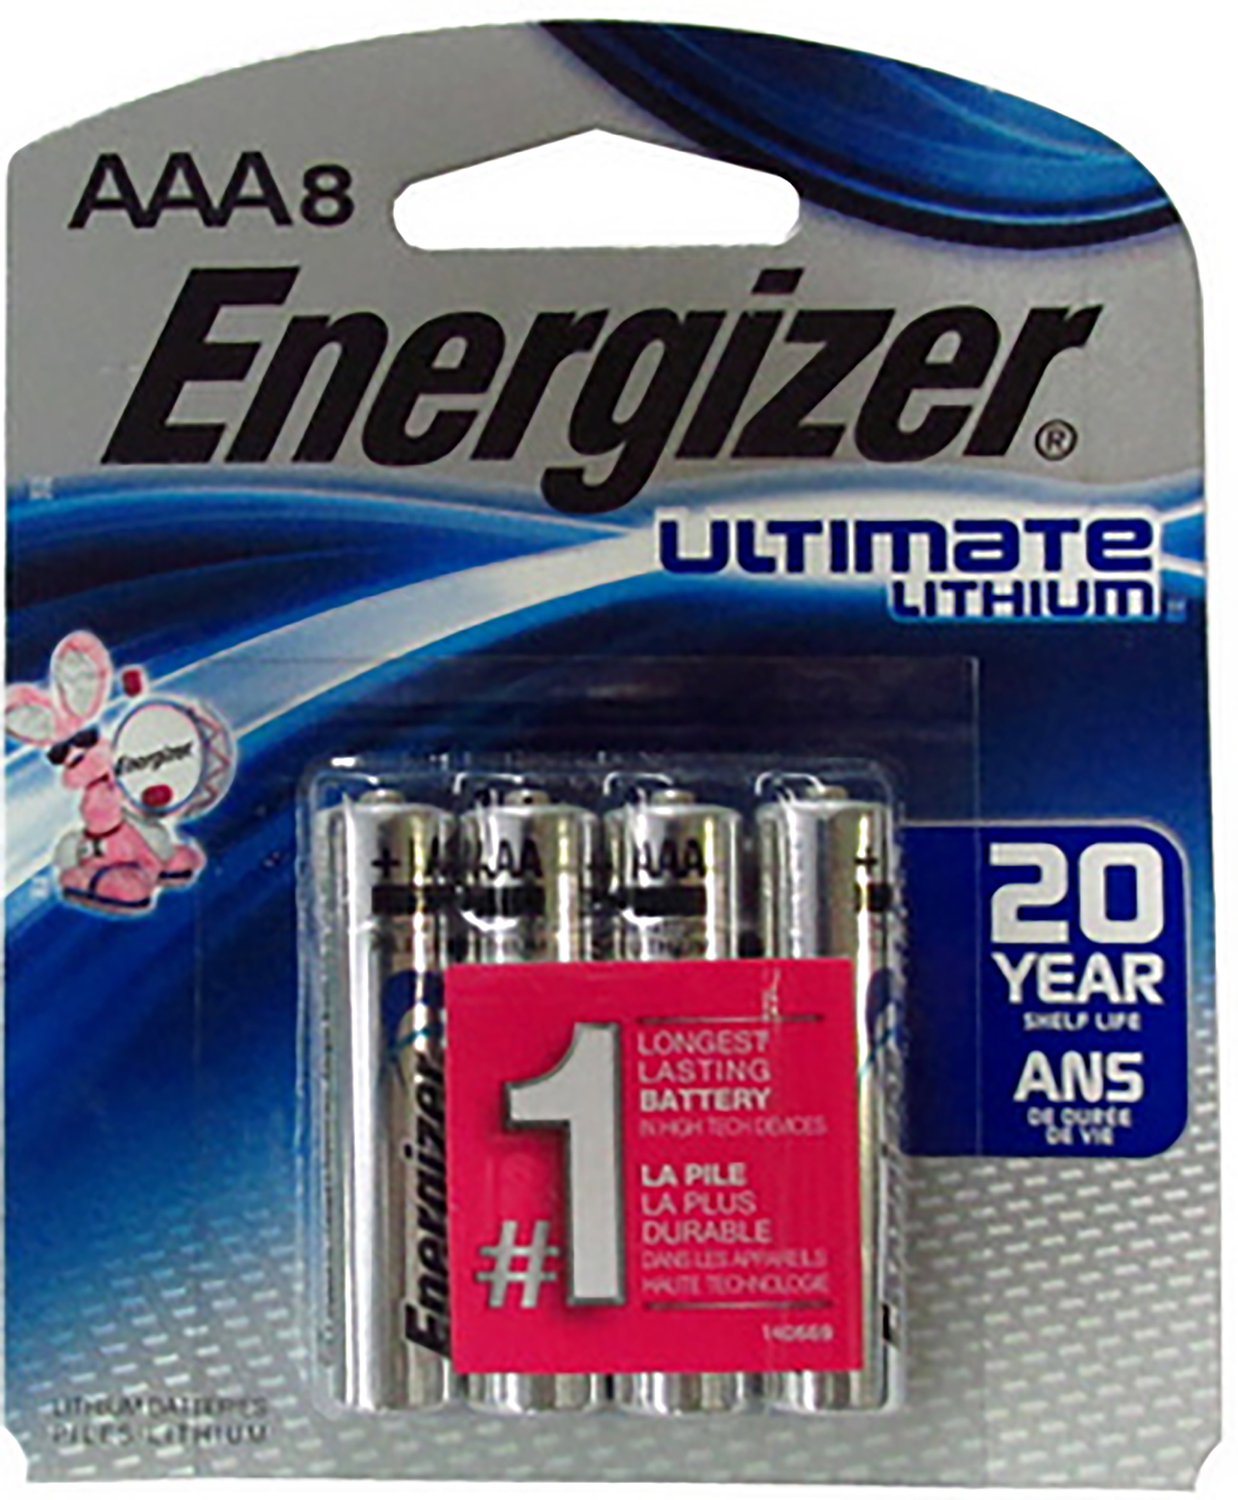 Energizer L92SBP-8.H3 AAA Ultimate Lithium 1.5 volts Lithium